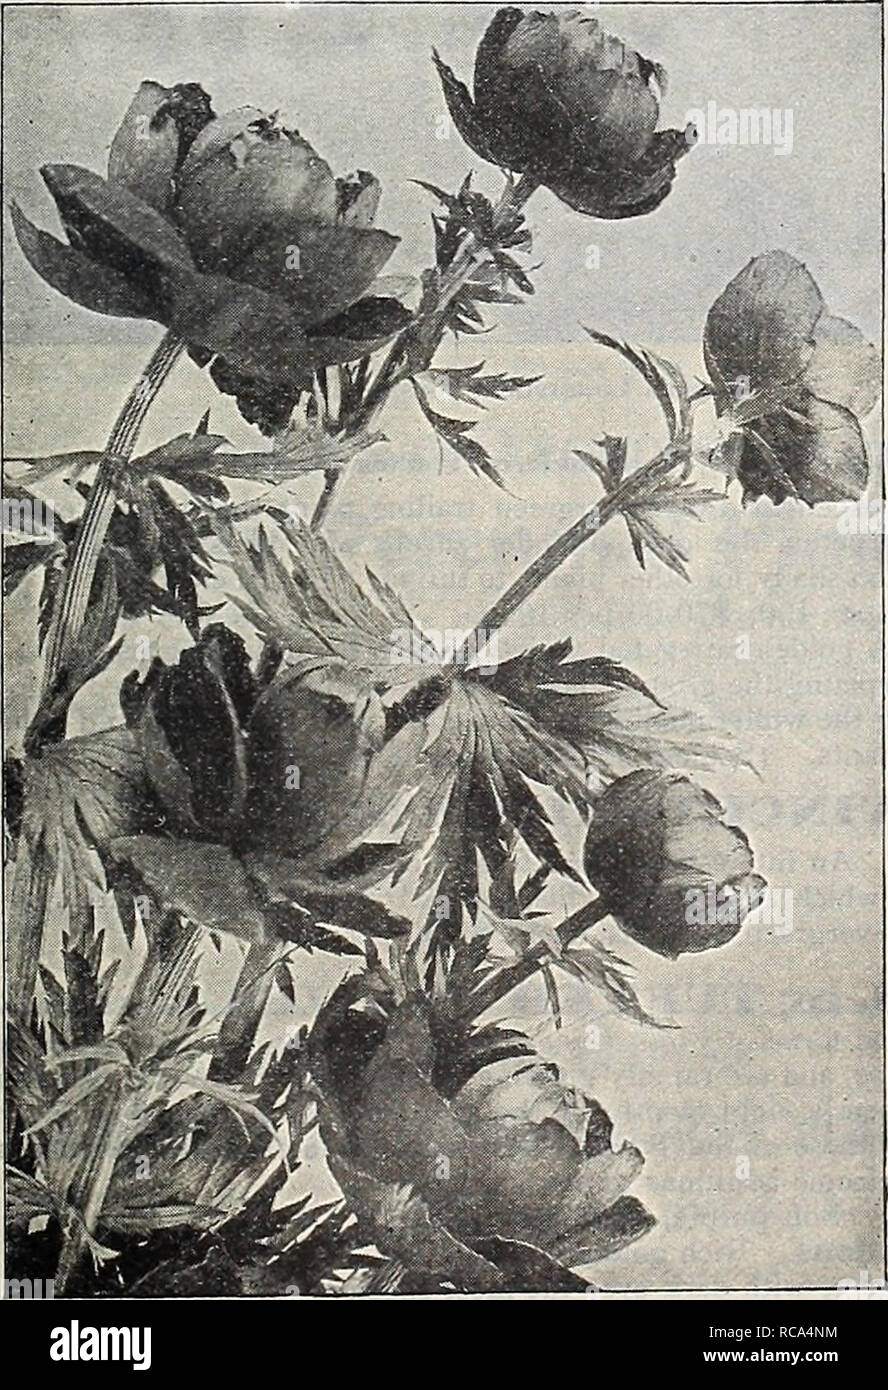 . Dreer's garden book 1918. Seeds Catalogs; Nursery stock Catalogs; Gardening Equipment and supplies Catalogs; Flowers Seeds Catalogs; Vegetables Seeds Catalogs; Fruit Seeds Catalogs. Trollius or Globe Flower Tkitoma (Red-Hot Poker Plant) TROLLIUS (Globe Flower Desirable free flowering plants, producing their giant Buttercup like blossoms on stems 1 to 2 feet high from May until August; suc- ceed admirably in the border in a half-shady position in well drained, preferably light soil. Caucasicus &quot;Orange Globe.&quot; Large, deep orange-colored flowers. EuropaeilS. Large, bright yellow, glob Stock Photo